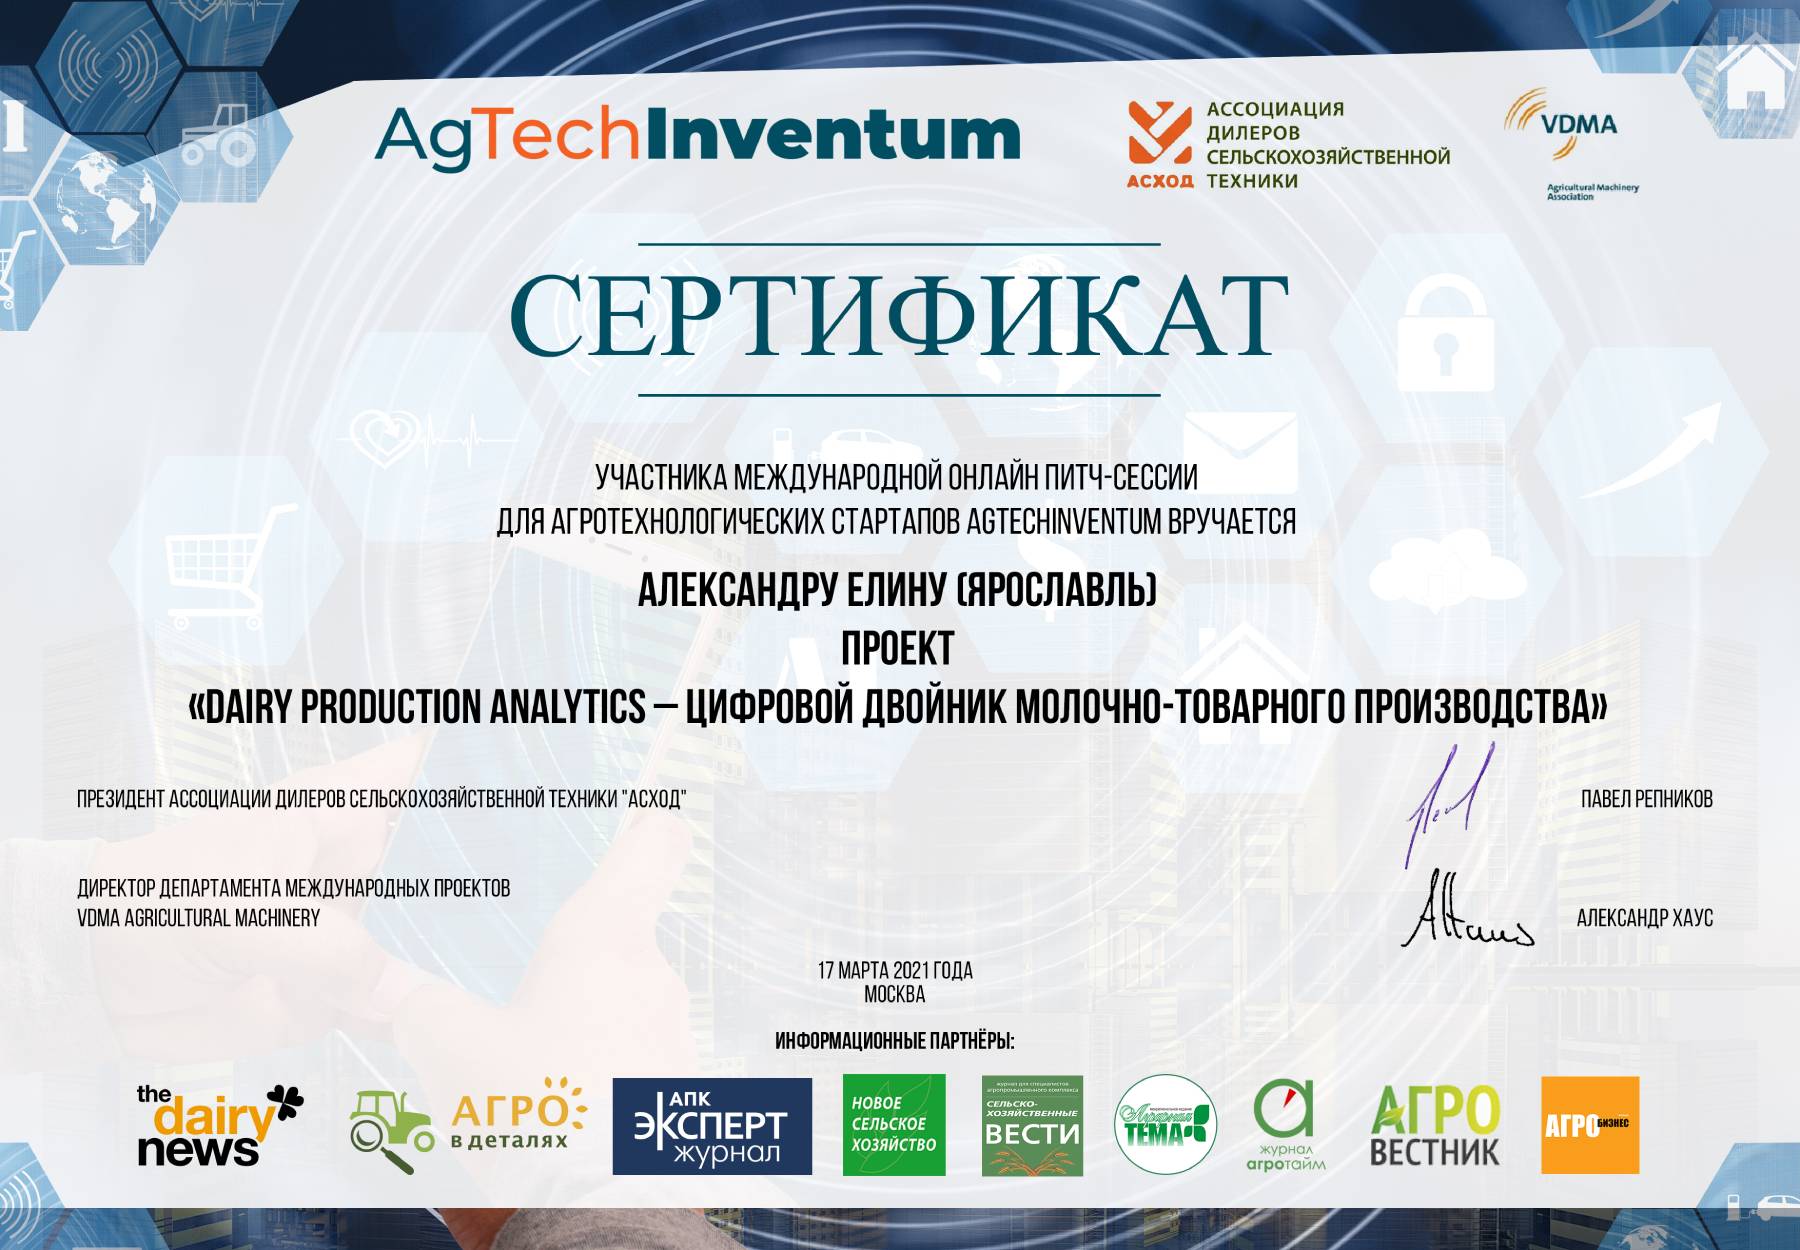 DPA is a participant of the AGTECHINVENTUM international online pitch session - Smart4Agro